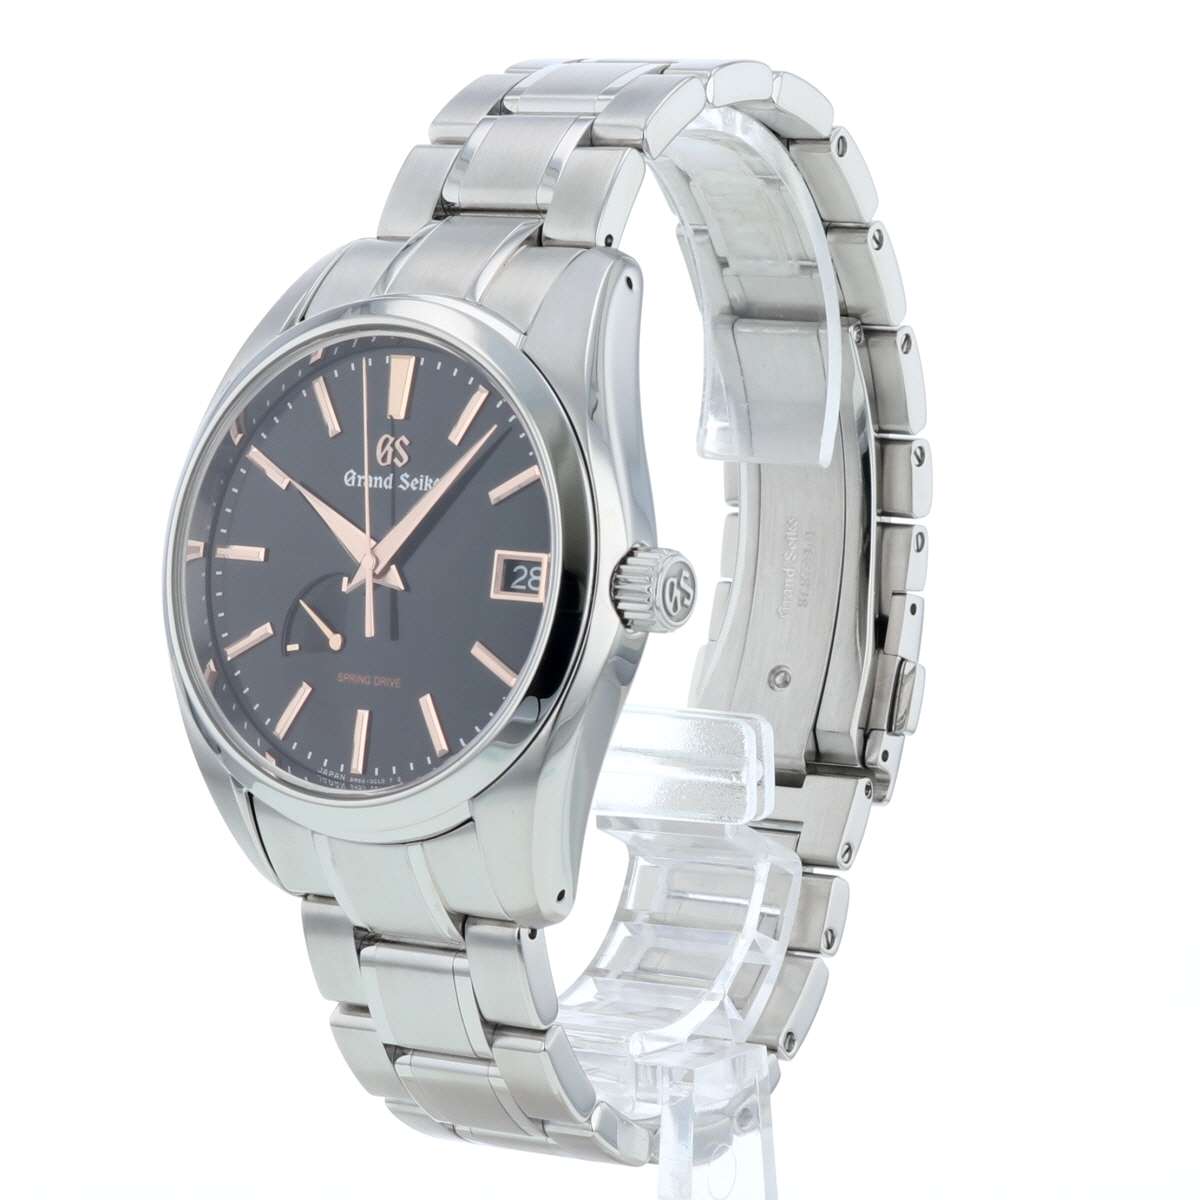 Grand Seiko SBGA395 (9R65-0CY0) Spring Drive Heritage Collection Men’s Watch